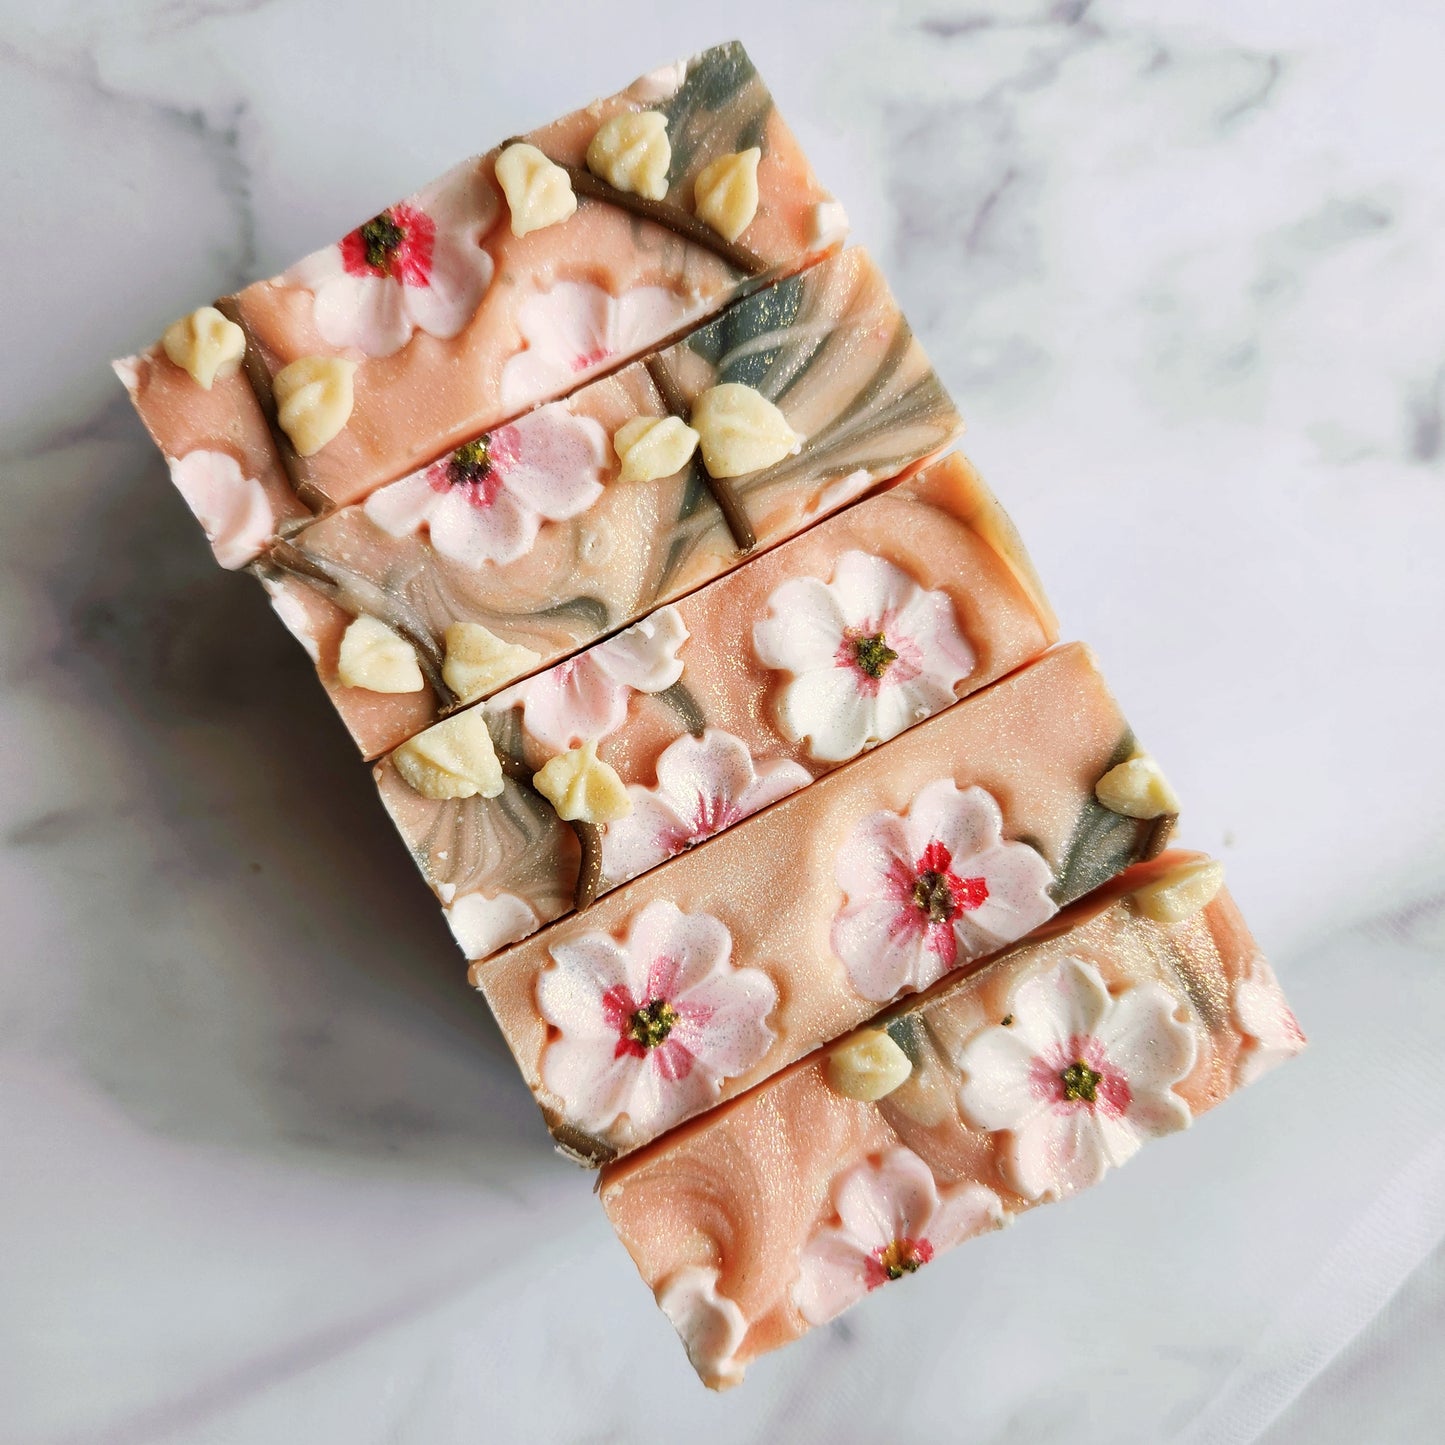 Cherry Blossoms - Cow and Goat Milk Soap